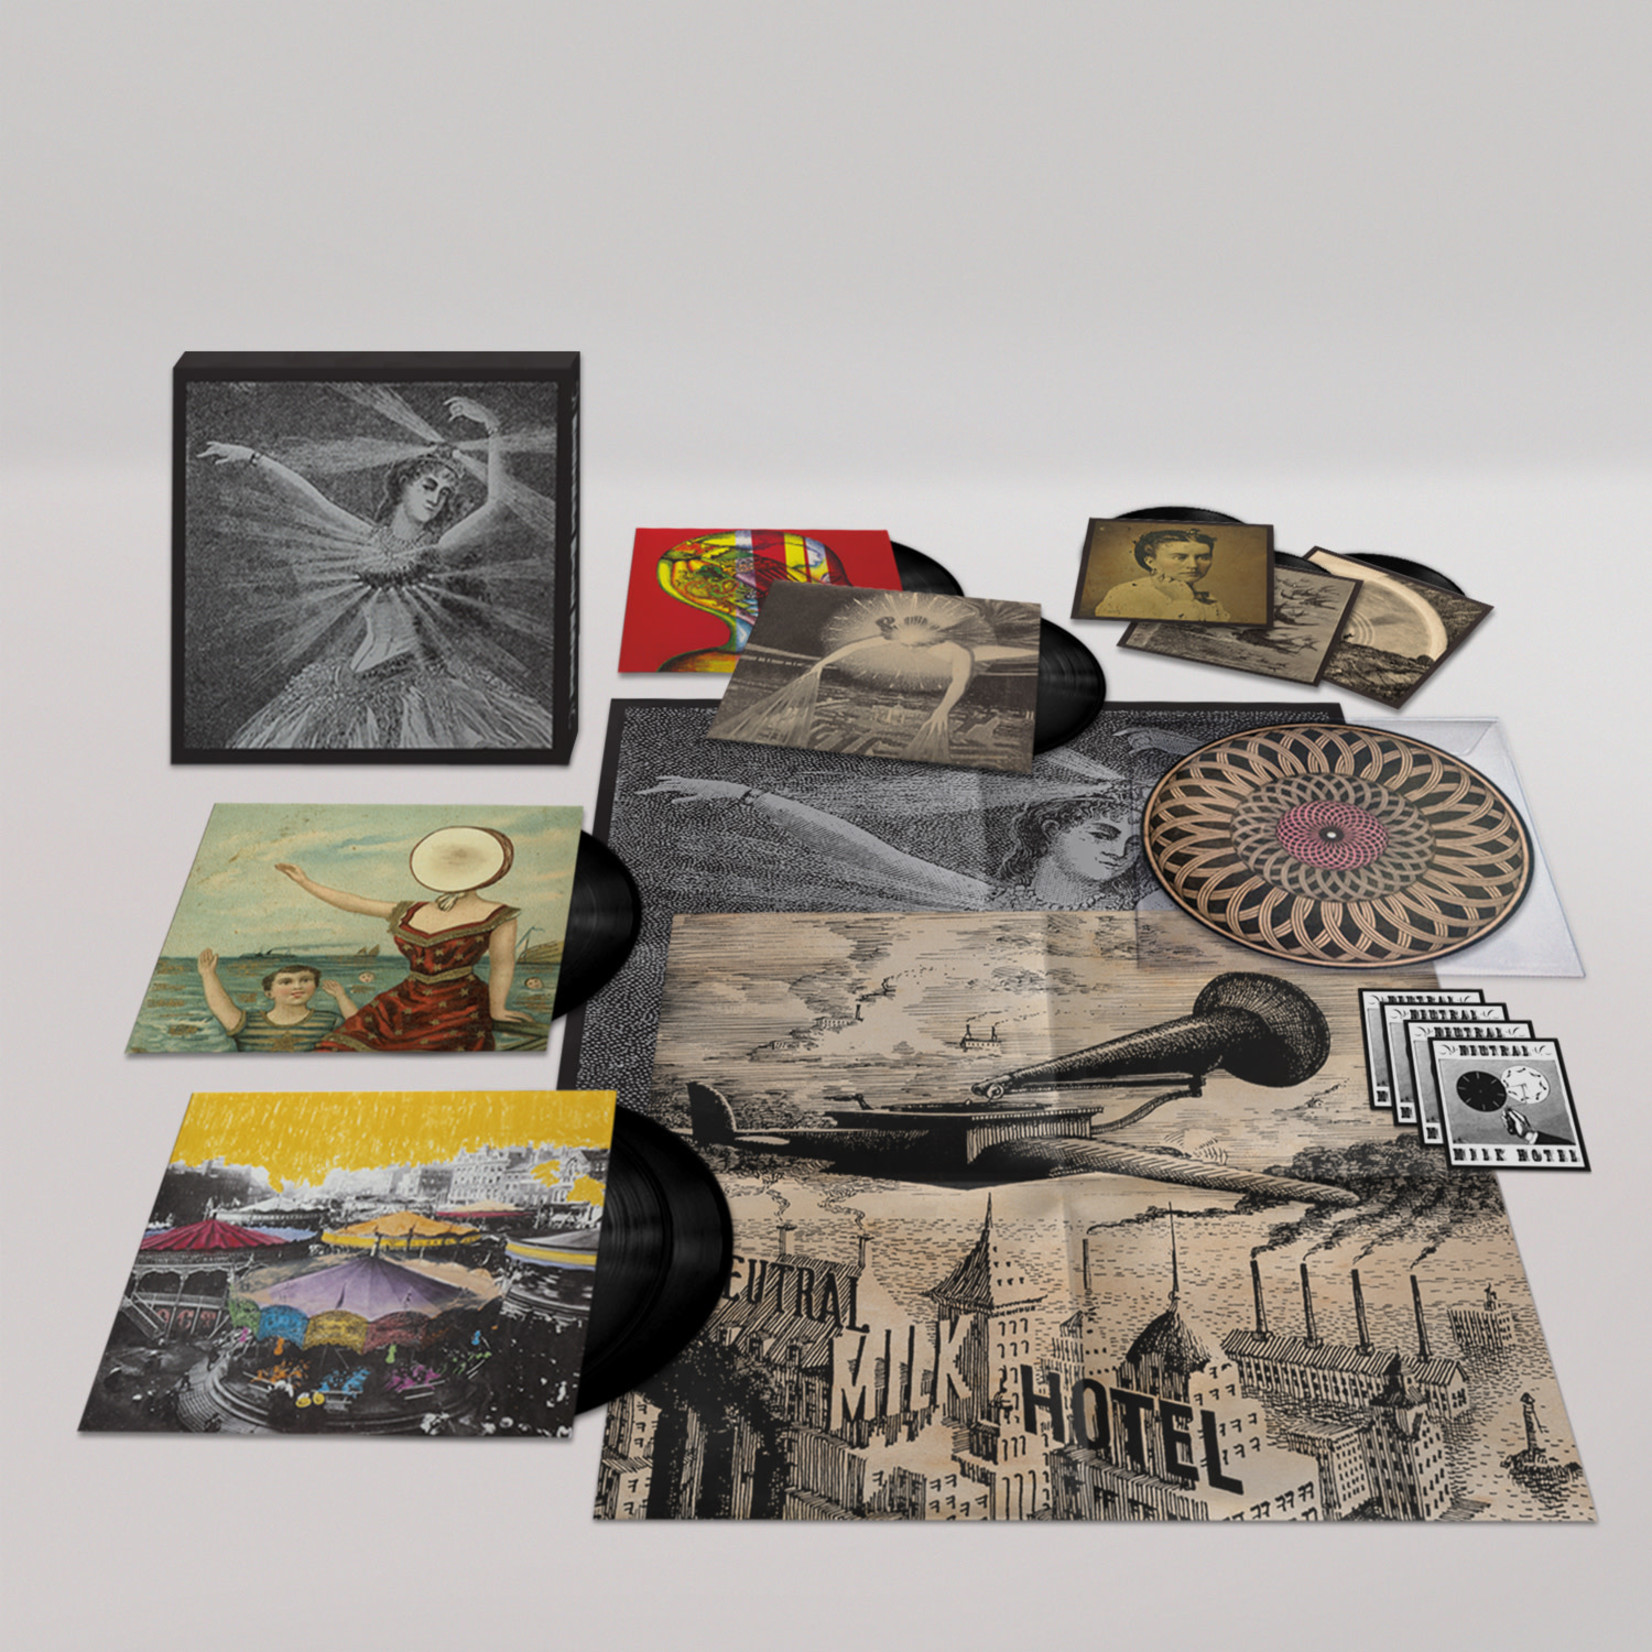 Merge Neutral Milk Hotel - The Collected Works of Neutral Milk Hotel (4LP+2x10"+3x7")